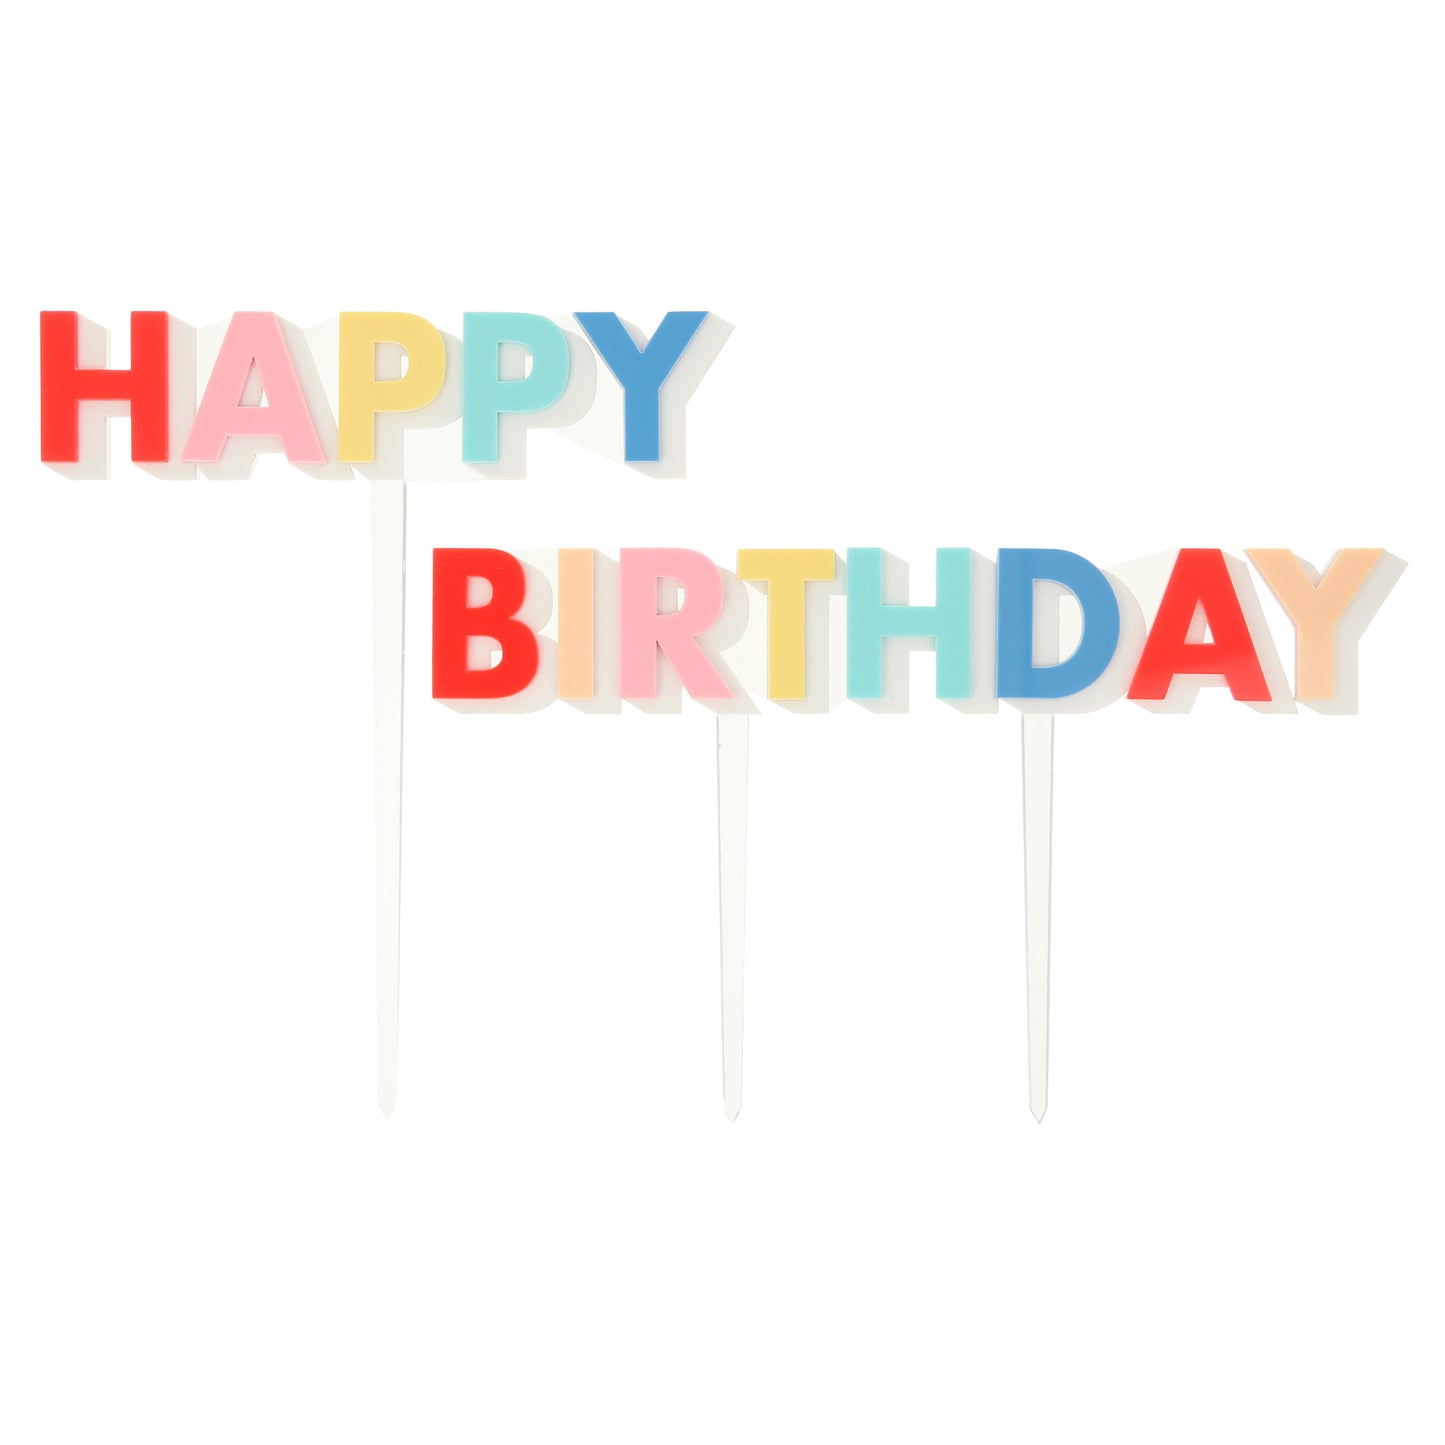 Happy Birthday Acrylic Topper - Favorite Little Things Co